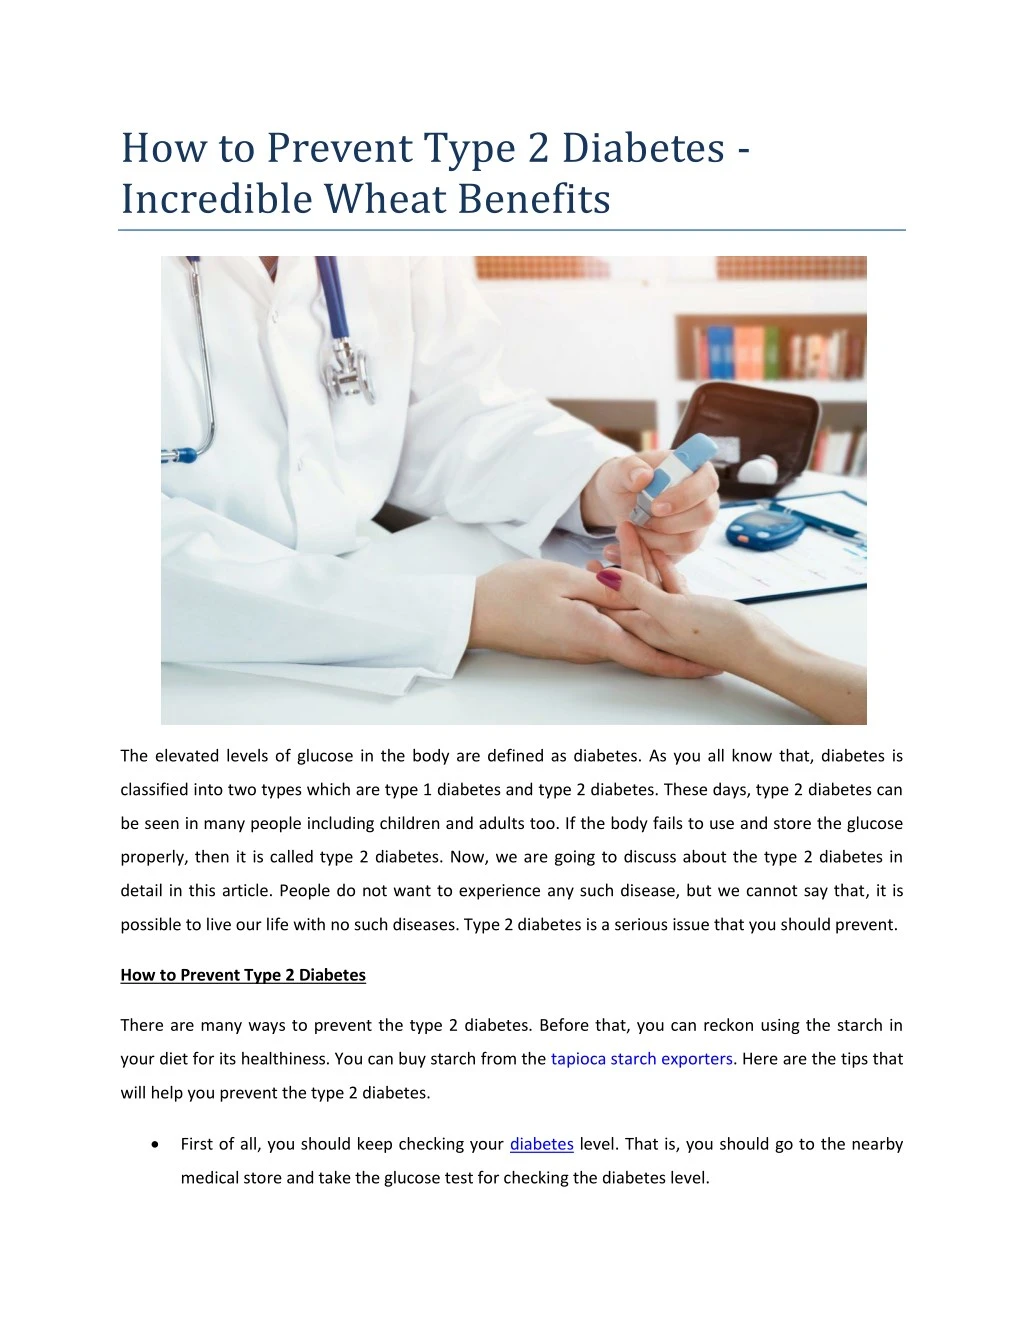 how to prevent type 2 diabetes incredible wheat